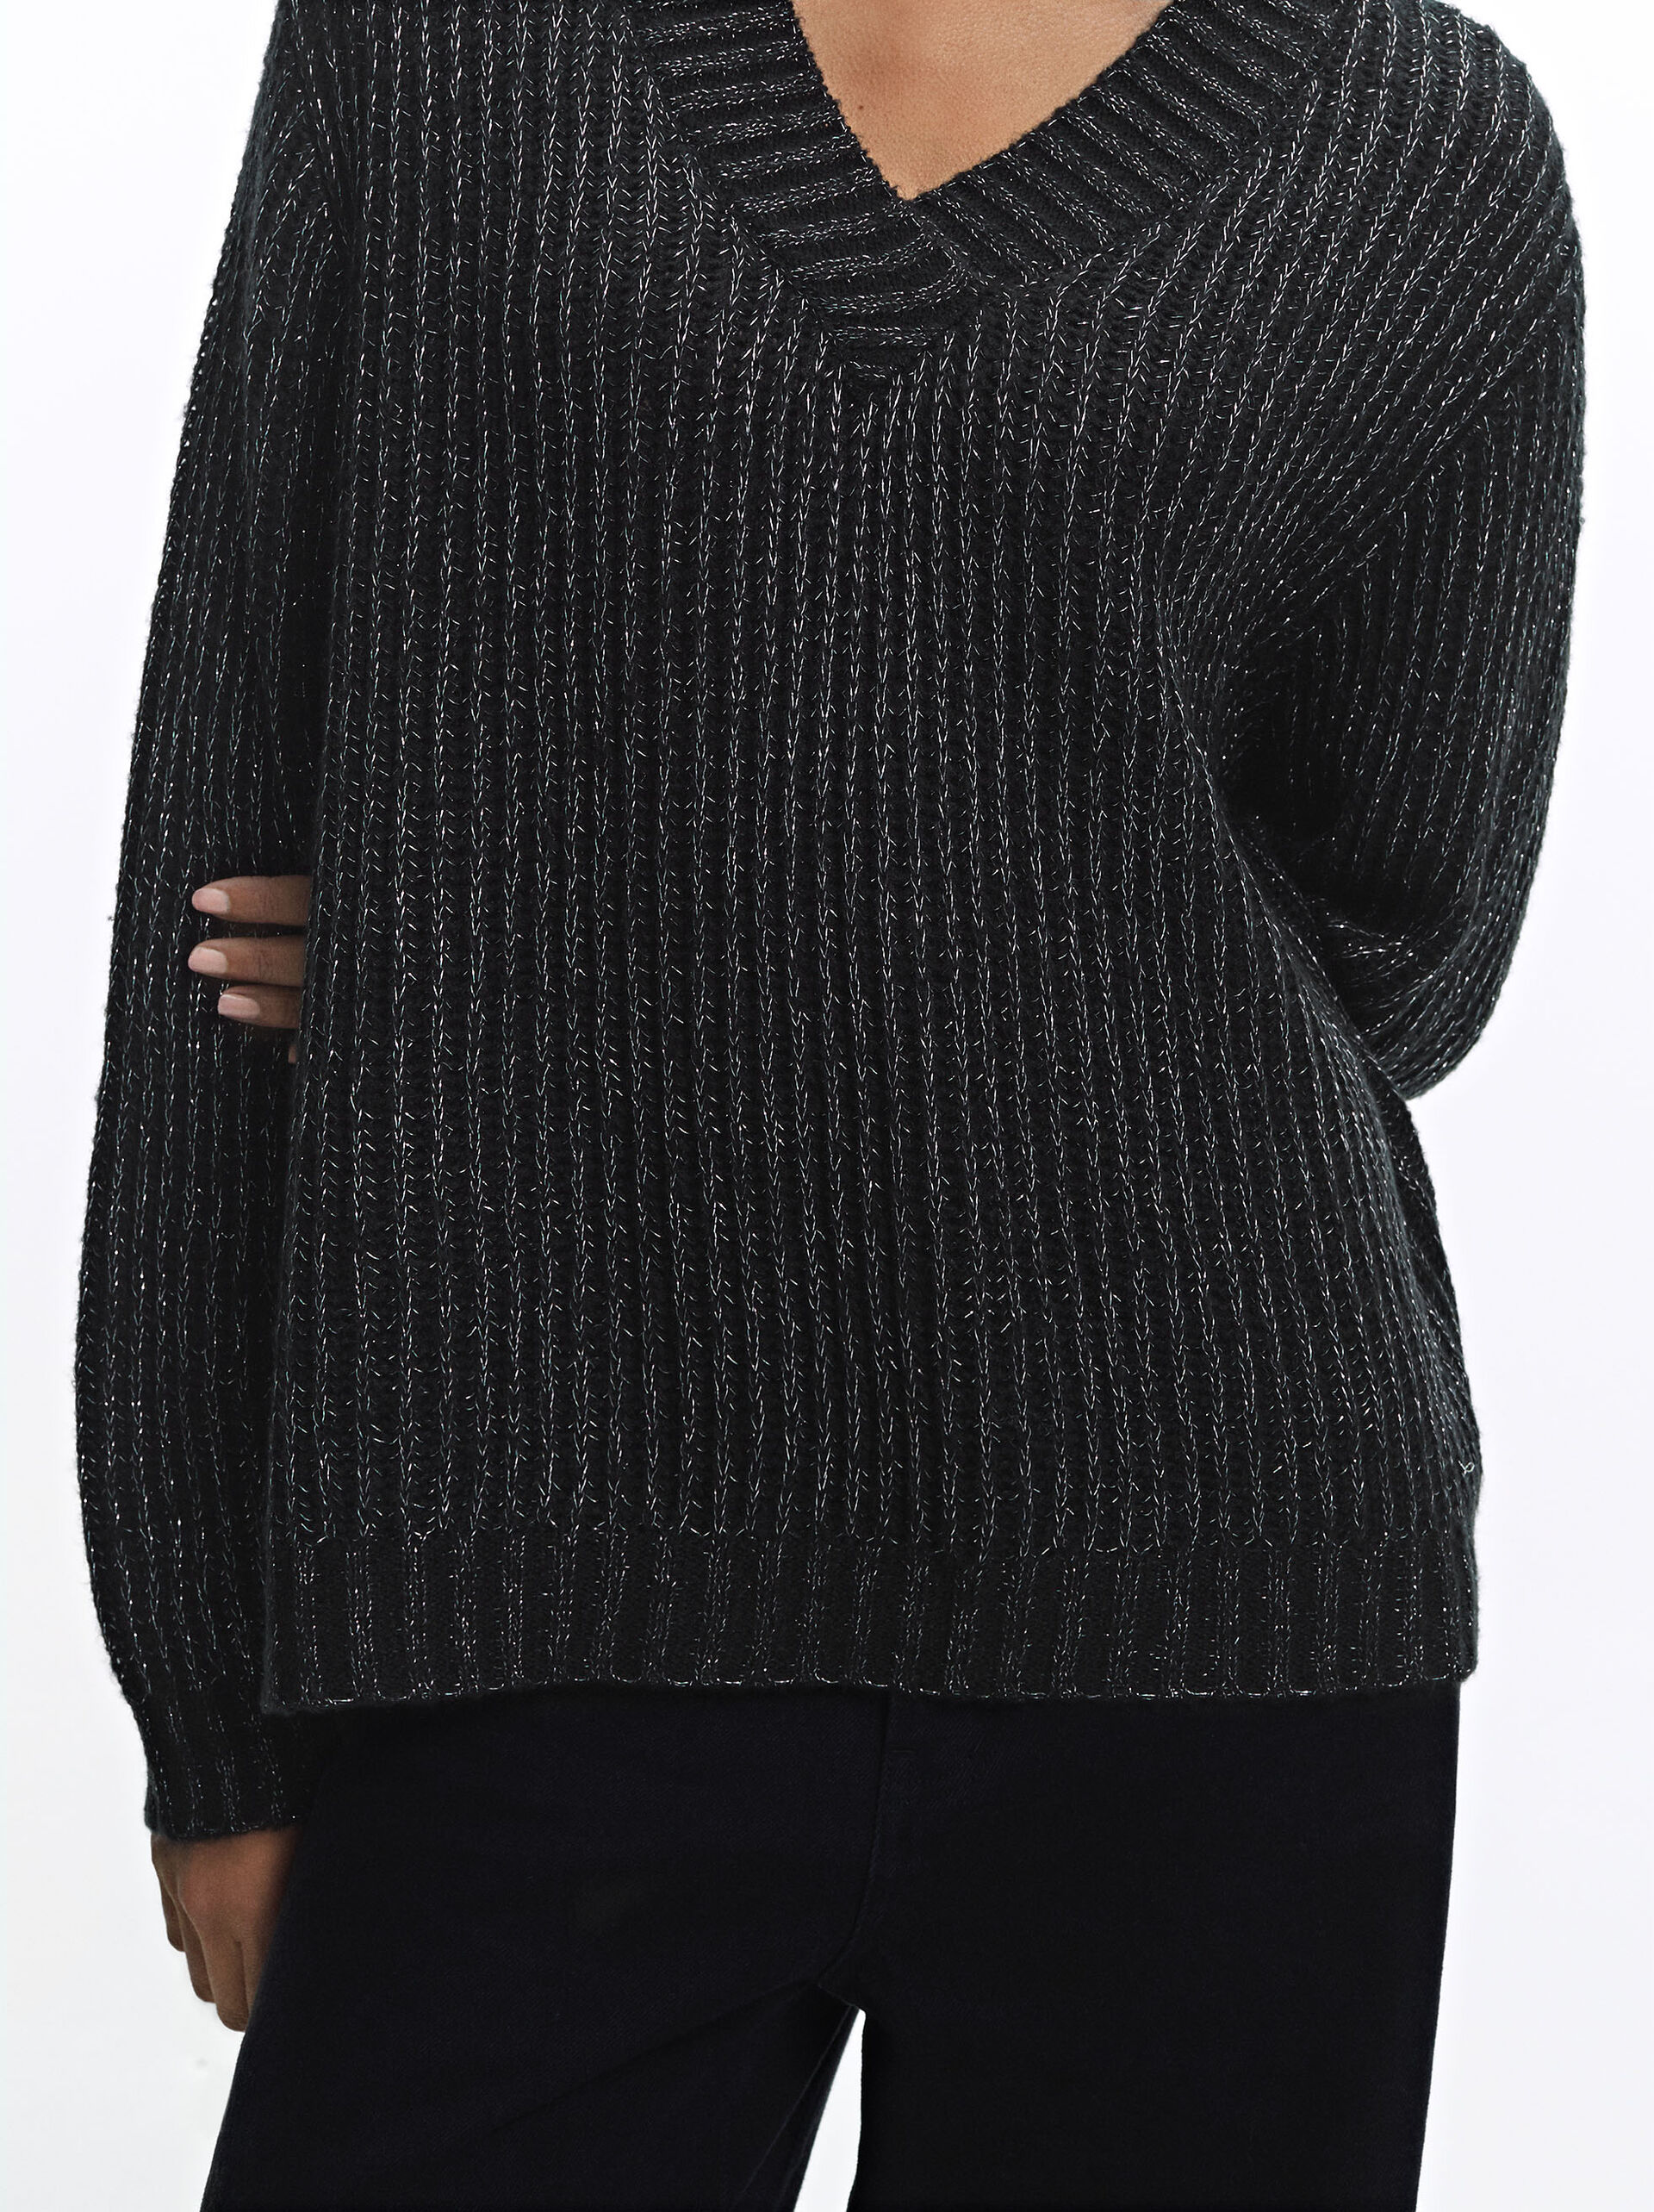 Knit Sweater With Wool image number 4.0